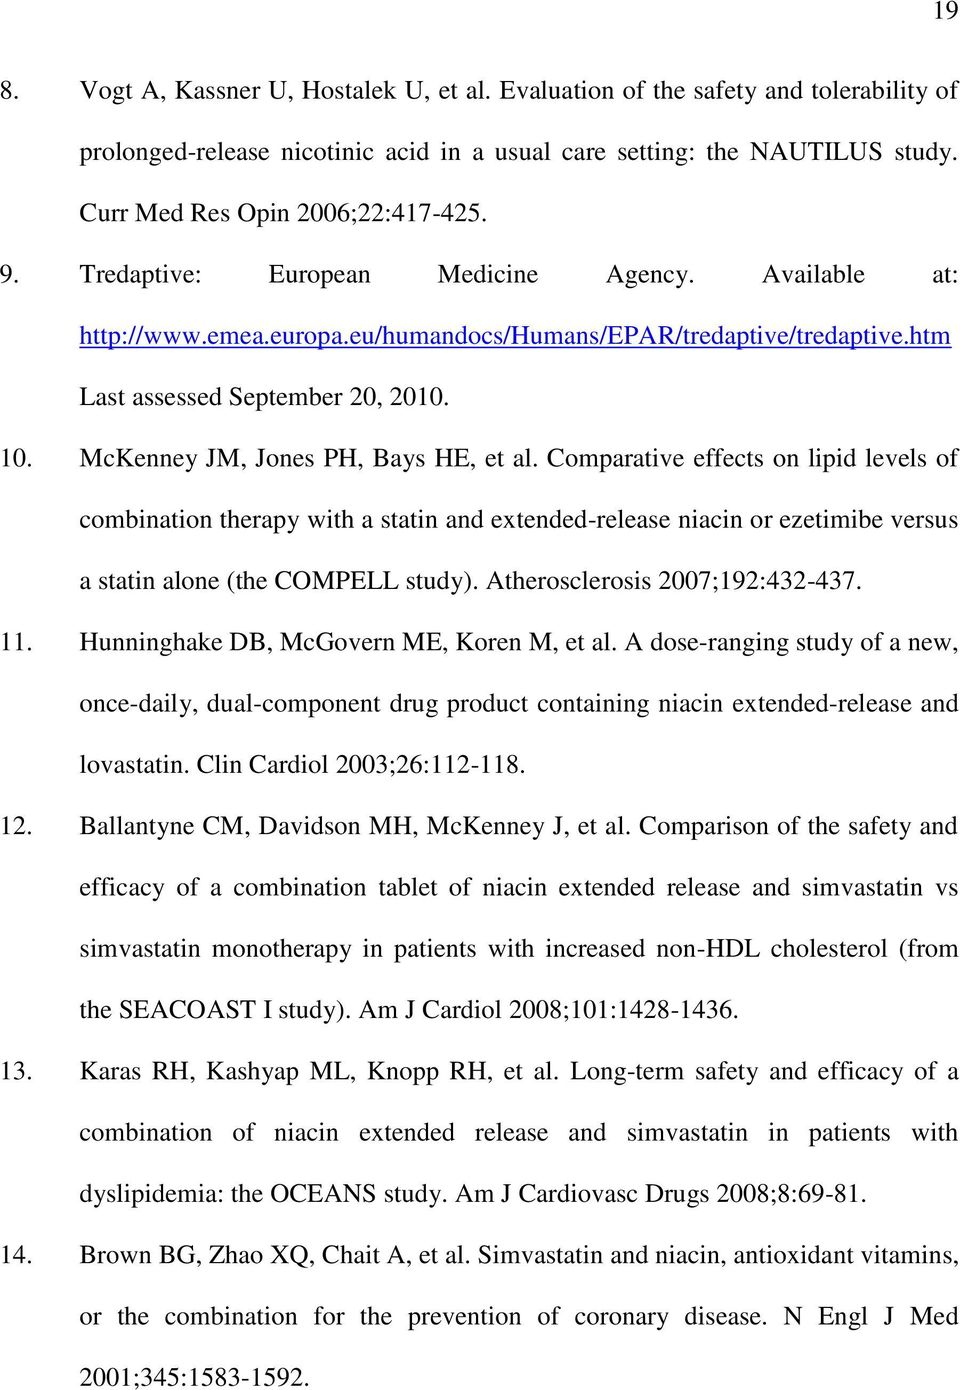 10. McKenney JM, Jones PH, Bays HE, et al. Comparative effects on lipid levels of combination therapy with a statin and extended-release niacin or ezetimibe versus a statin alone (the COMPELL study).